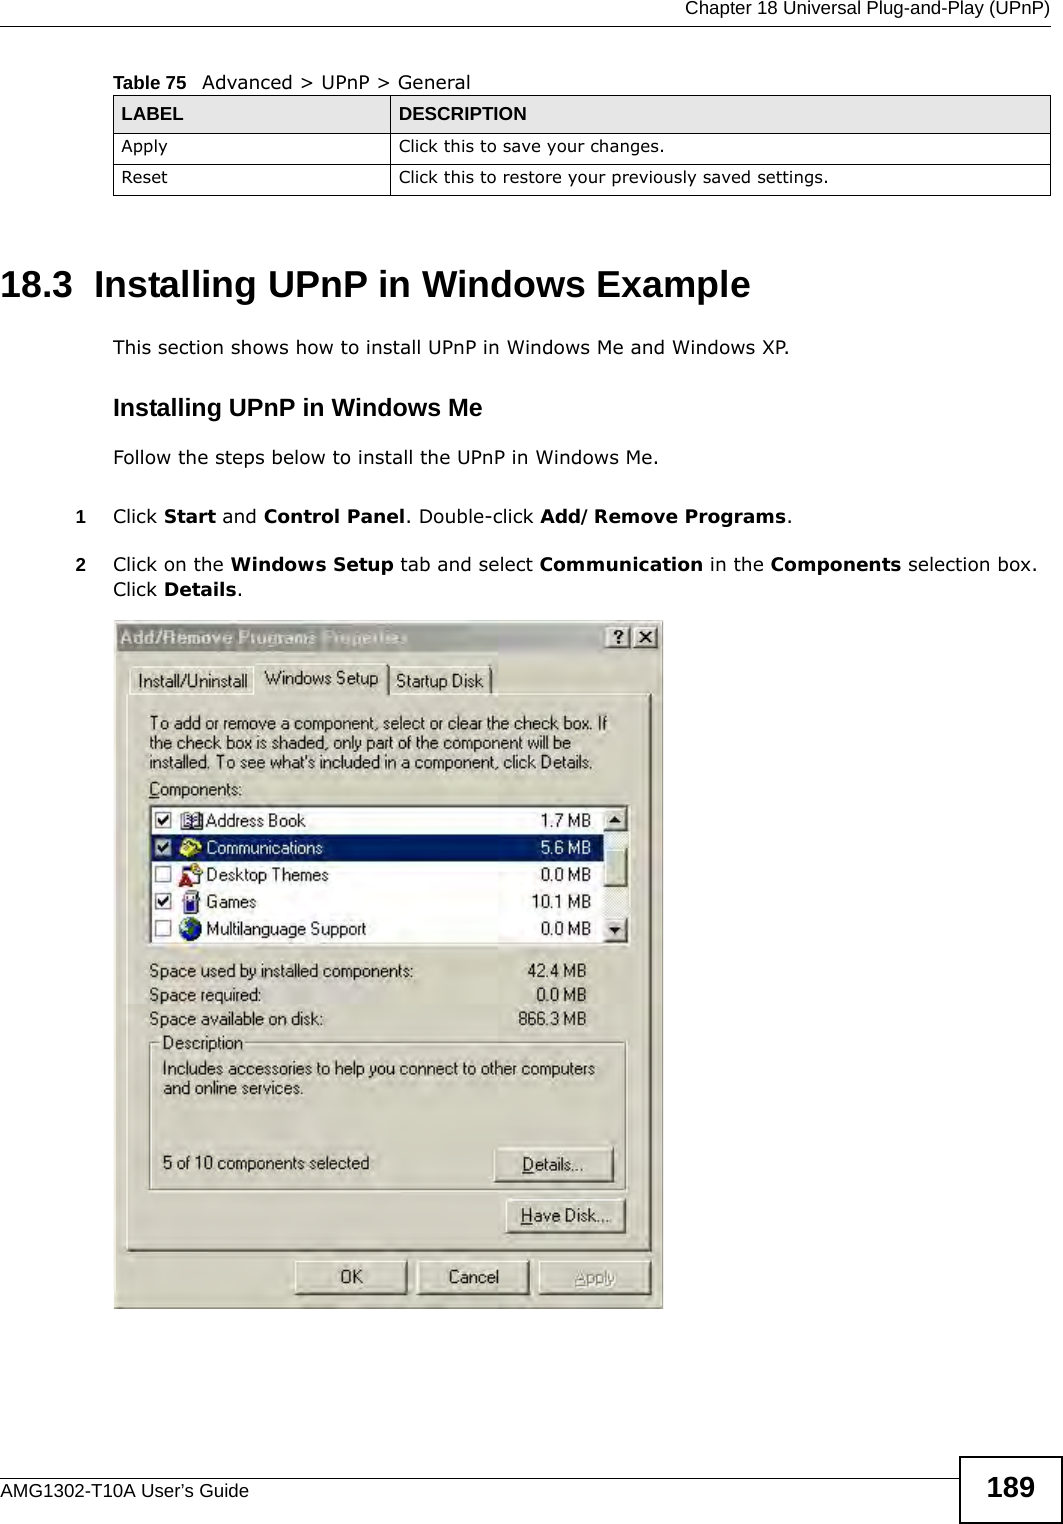  Chapter 18 Universal Plug-and-Play (UPnP)AMG1302-T10A User’s Guide 18918.3  Installing UPnP in Windows ExampleThis section shows how to install UPnP in Windows Me and Windows XP. Installing UPnP in Windows MeFollow the steps below to install the UPnP in Windows Me. 1Click Start and Control Panel. Double-click Add/Remove Programs.2Click on the Windows Setup tab and select Communication in the Components selection box. Click Details. Add/Remove Programs: Windows Setup: Communication Apply Click this to save your changes.Reset Click this to restore your previously saved settings.Table 75   Advanced &gt; UPnP &gt; GeneralLABEL DESCRIPTION